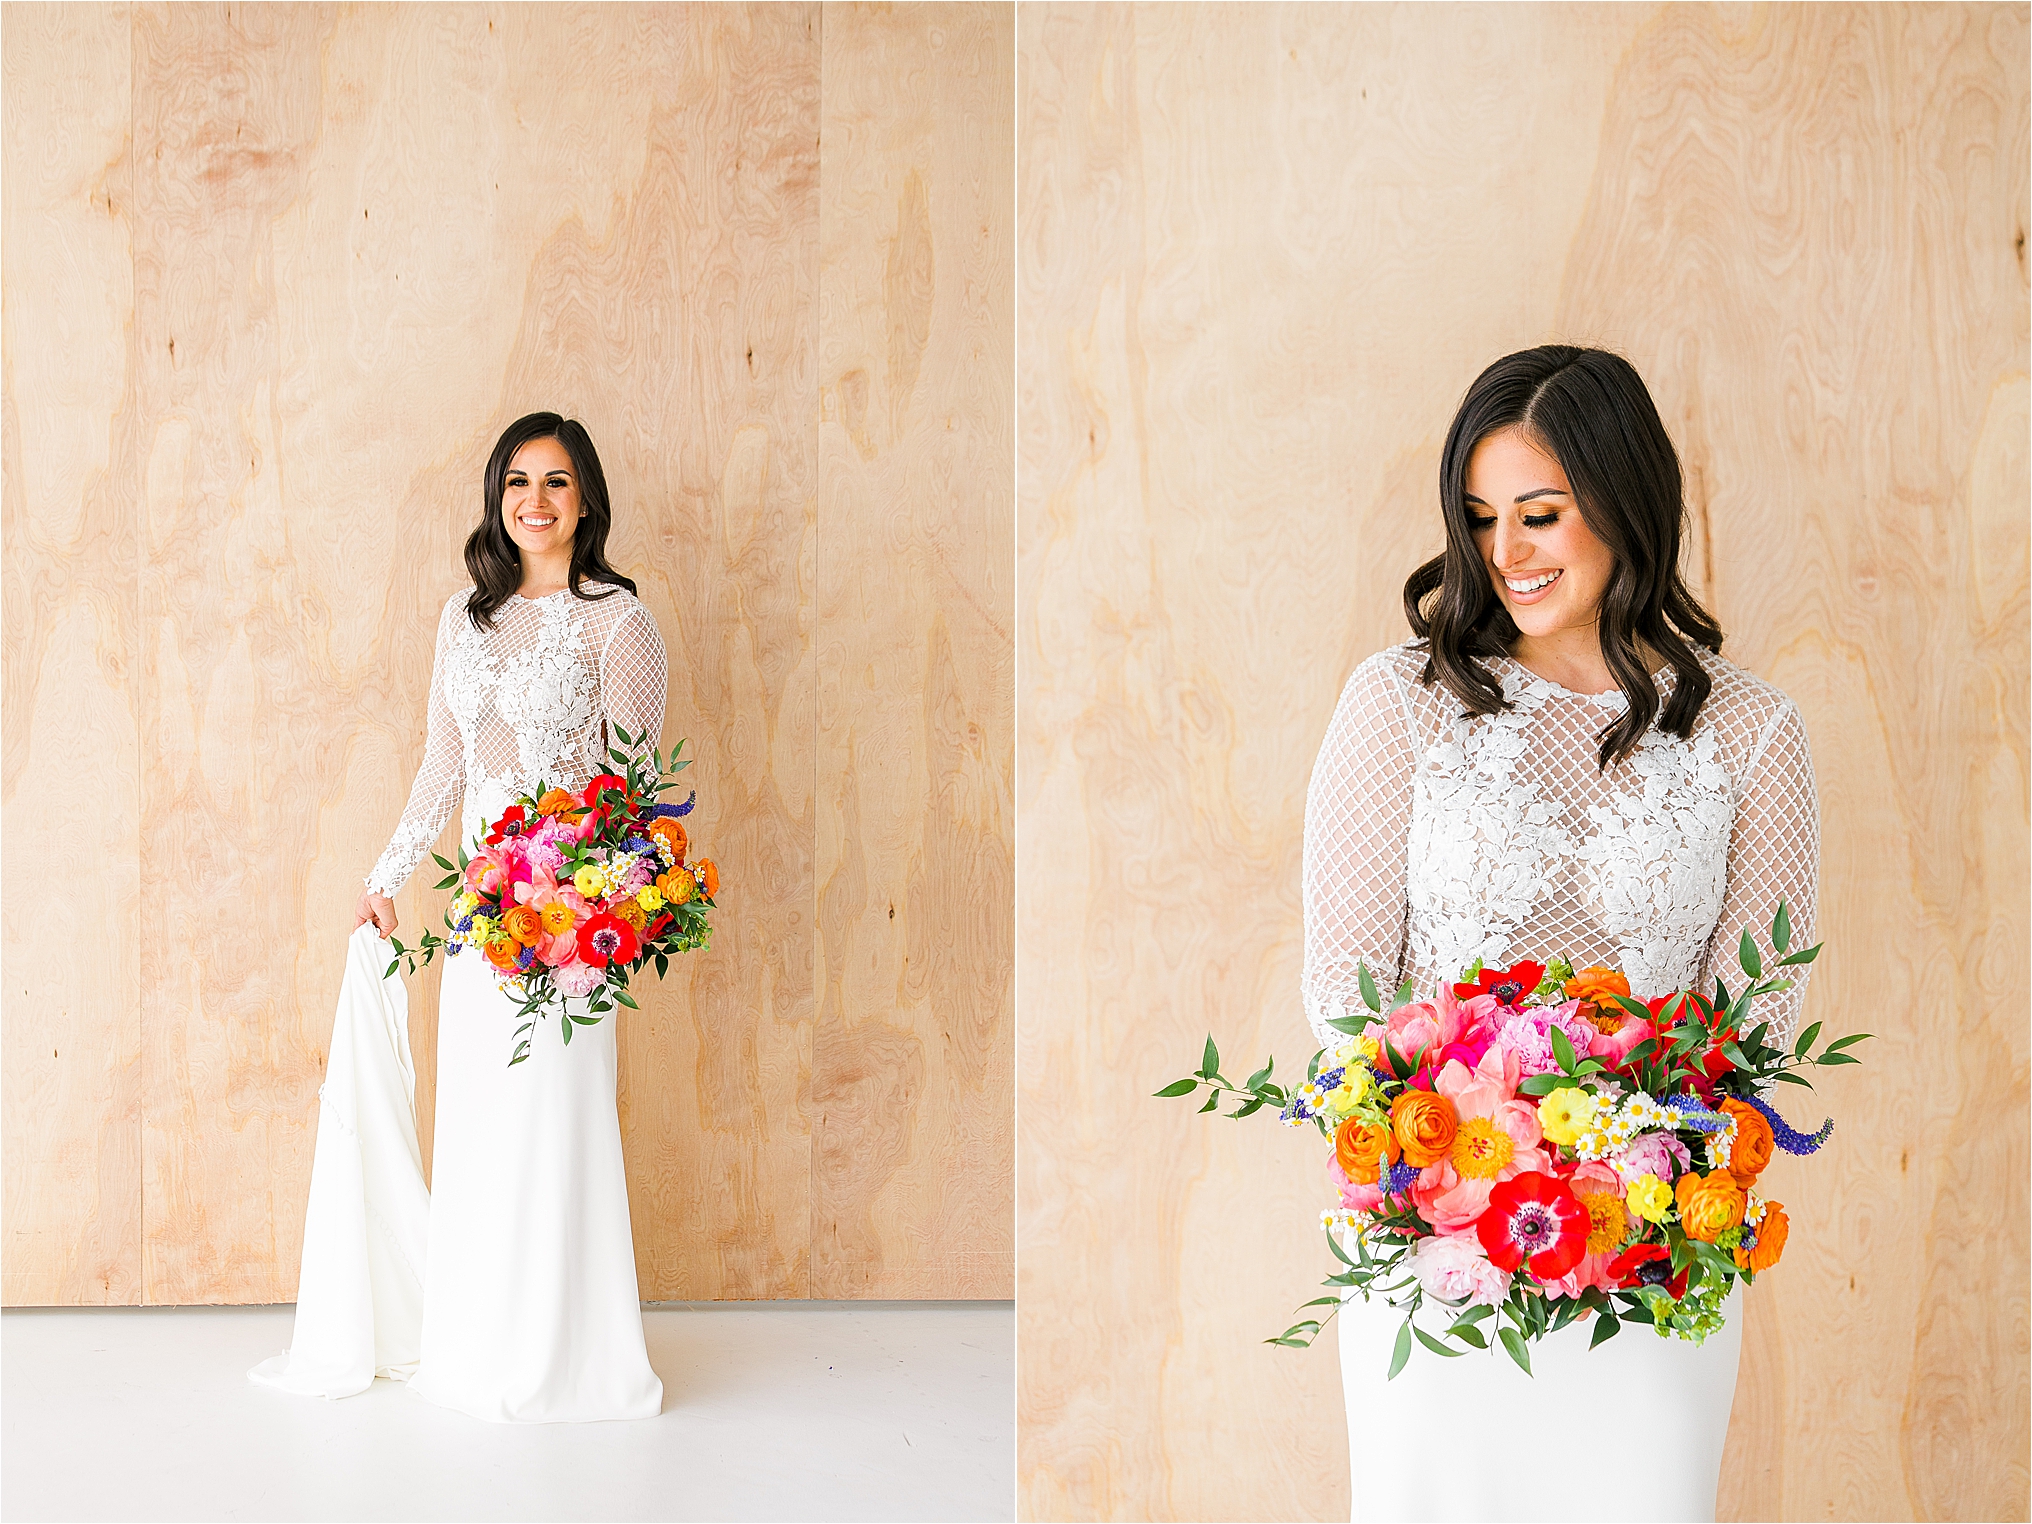 Colorful Spring Bridal Session at Black and Light Studios in Dallas, TX with DFW Wedding Photographer Jillian Hogan 